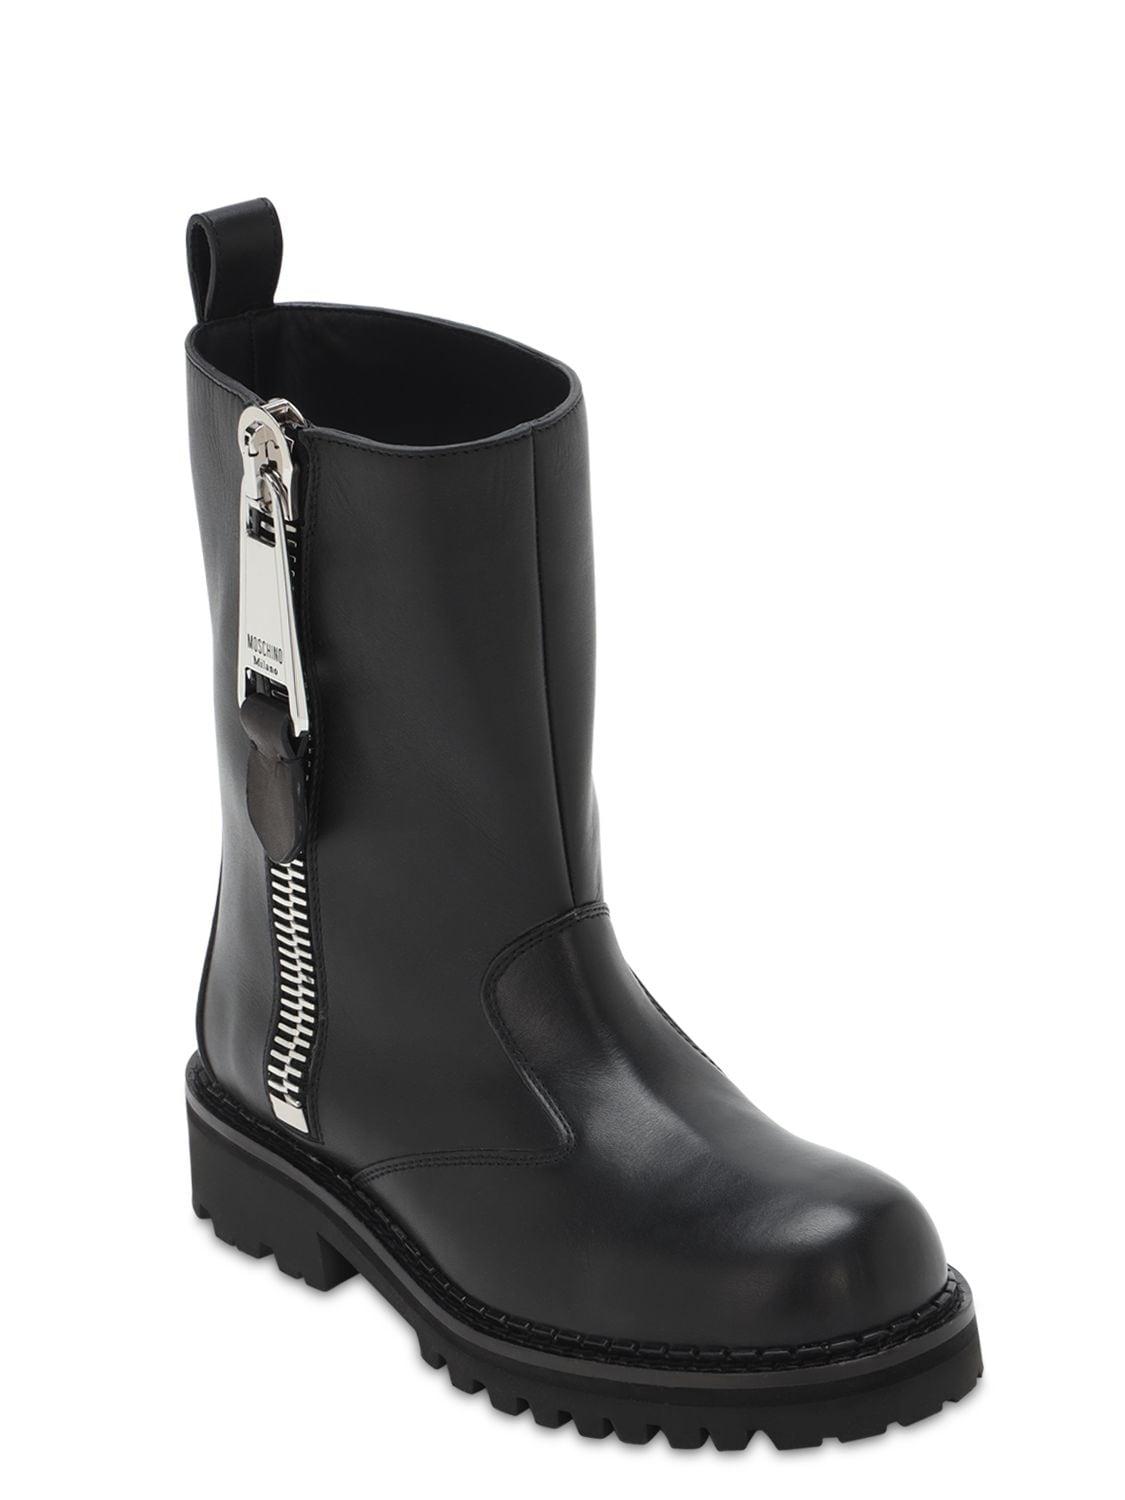 Moschino Macro Zip Leather Ankle Boots in Black for Men - Lyst